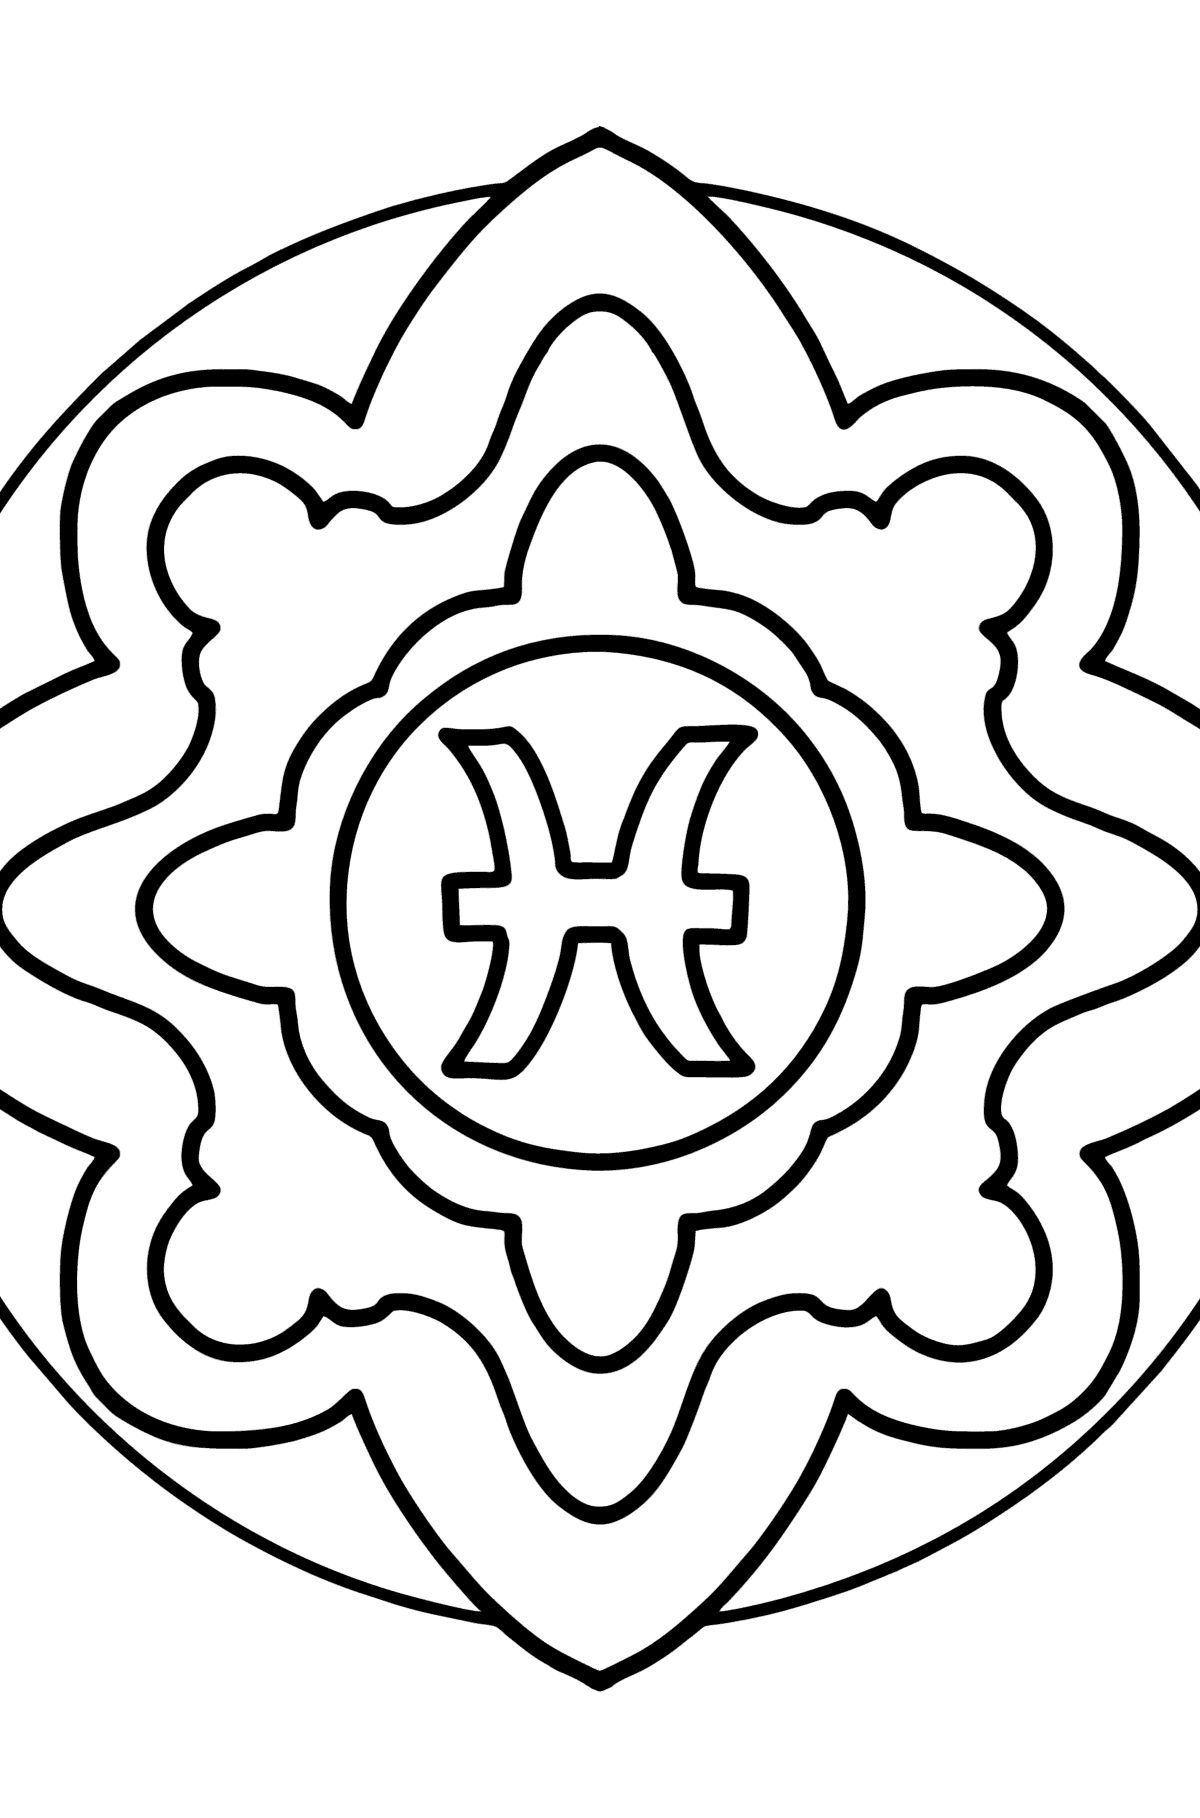 Coloring page - zodiac sign Pisces - Coloring Pages for Kids